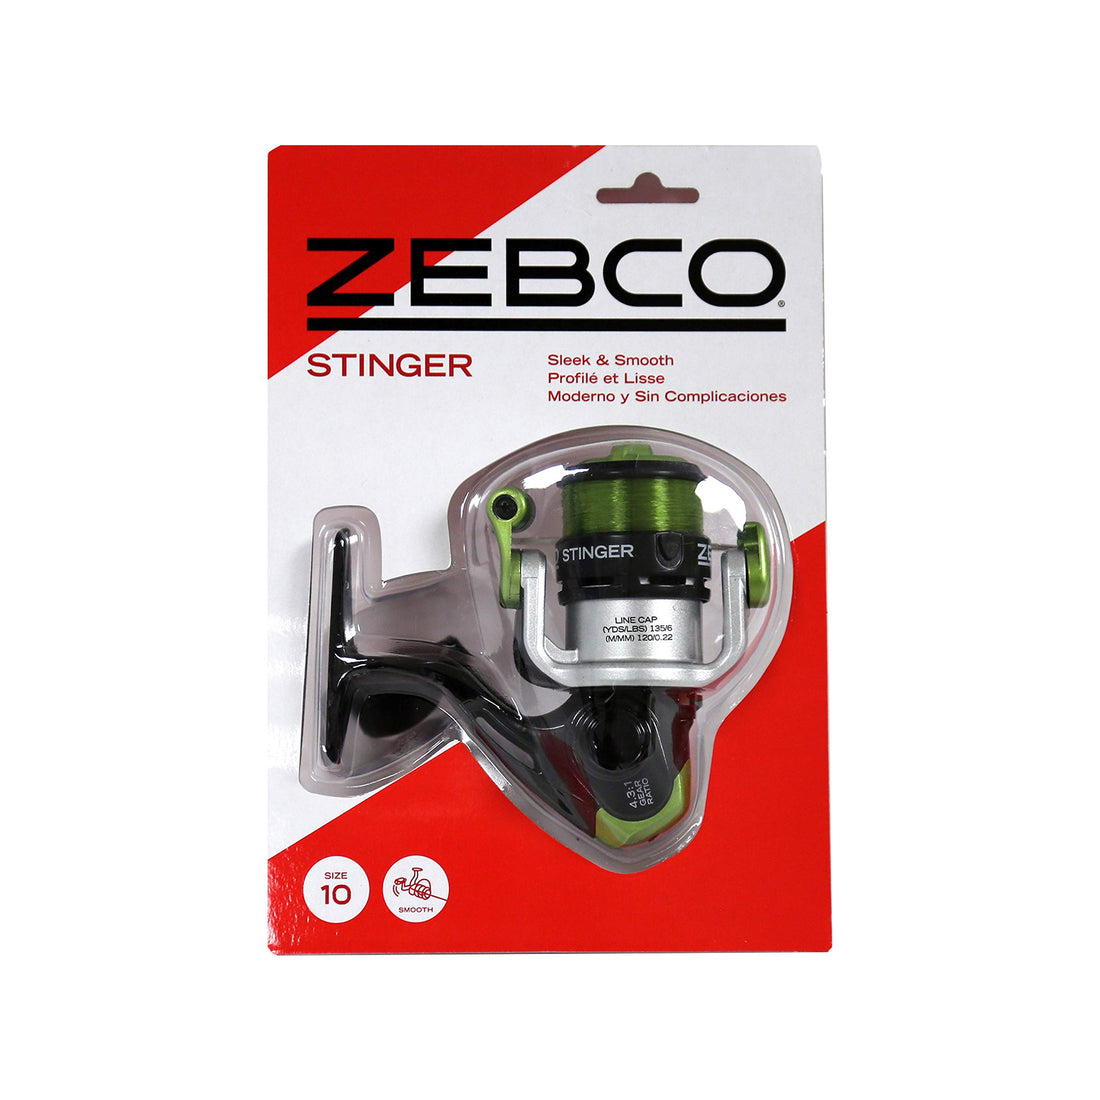 Zebco Stinger Spinning Fishing Reel, Size 10 Reel, Changeable Right- or Left-Hand Retrieve, 4.3:1 Gear Ratio, All-Metal Gears, Pre-Spooled with 6-Pound Zebco Line, Silver/Black